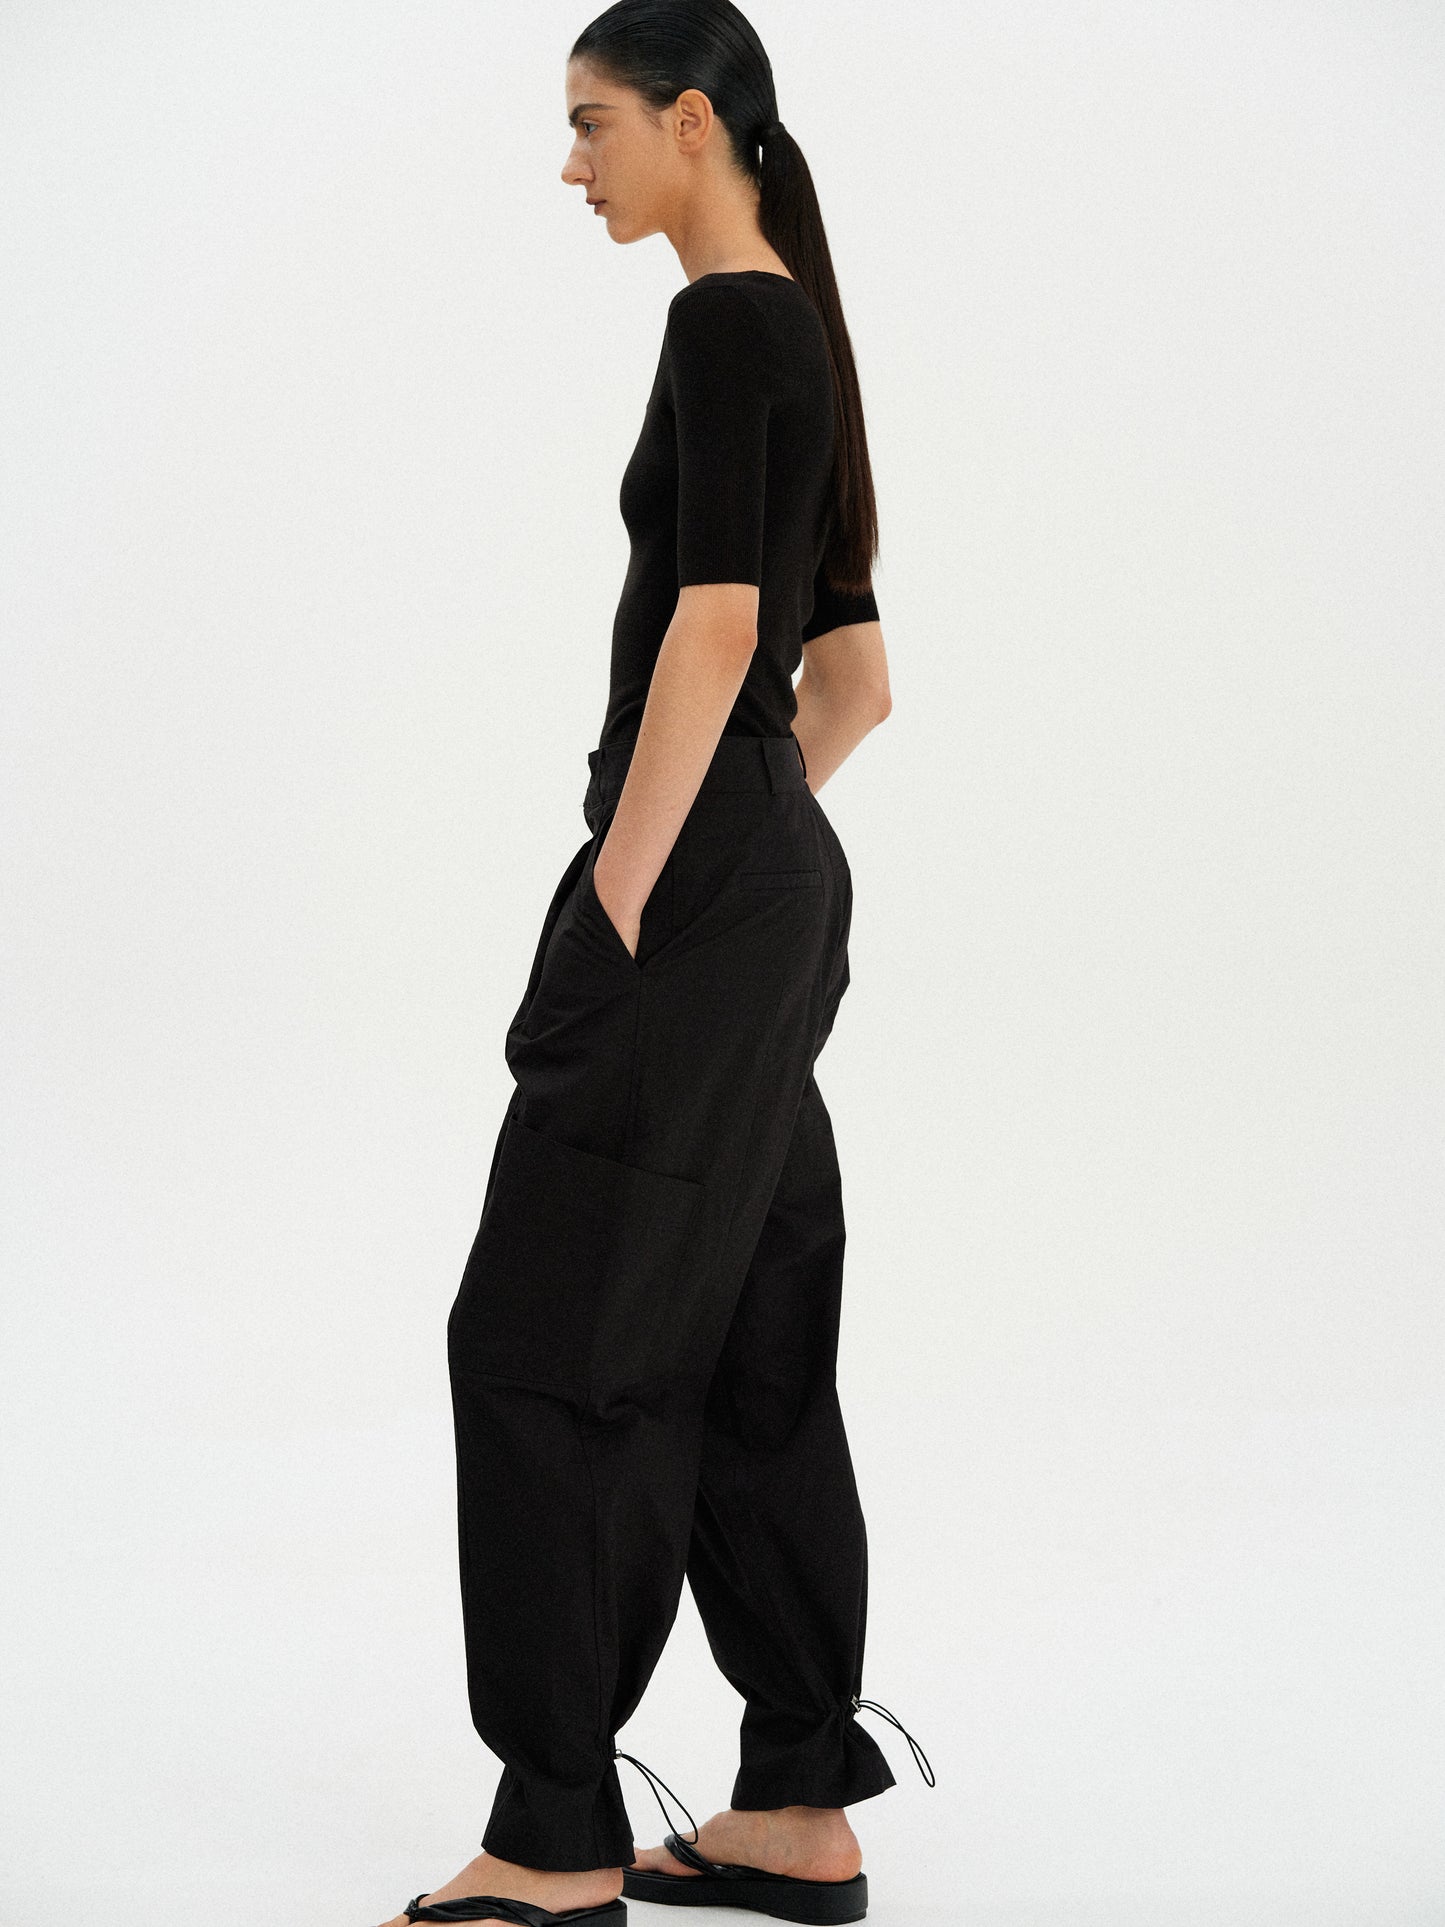 Low Pocket Toggle Trousers, Black